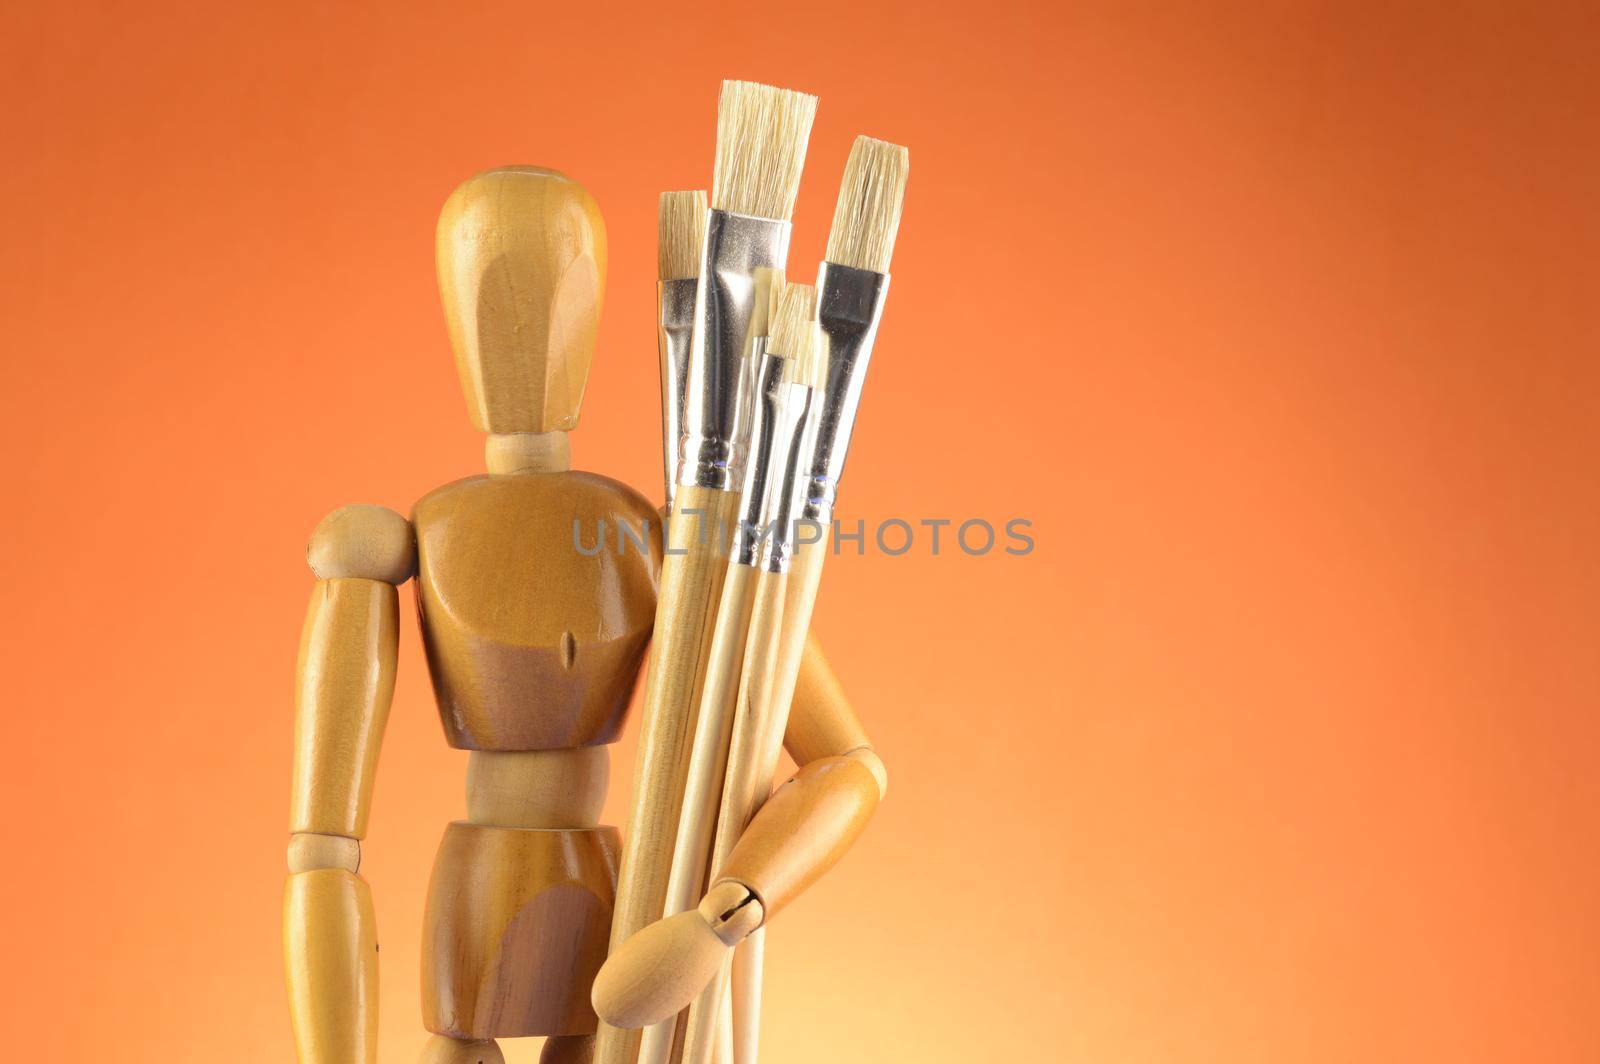 An Artists wooden Dummy Mannequin stands with some dry paintbrushes over an orange background.